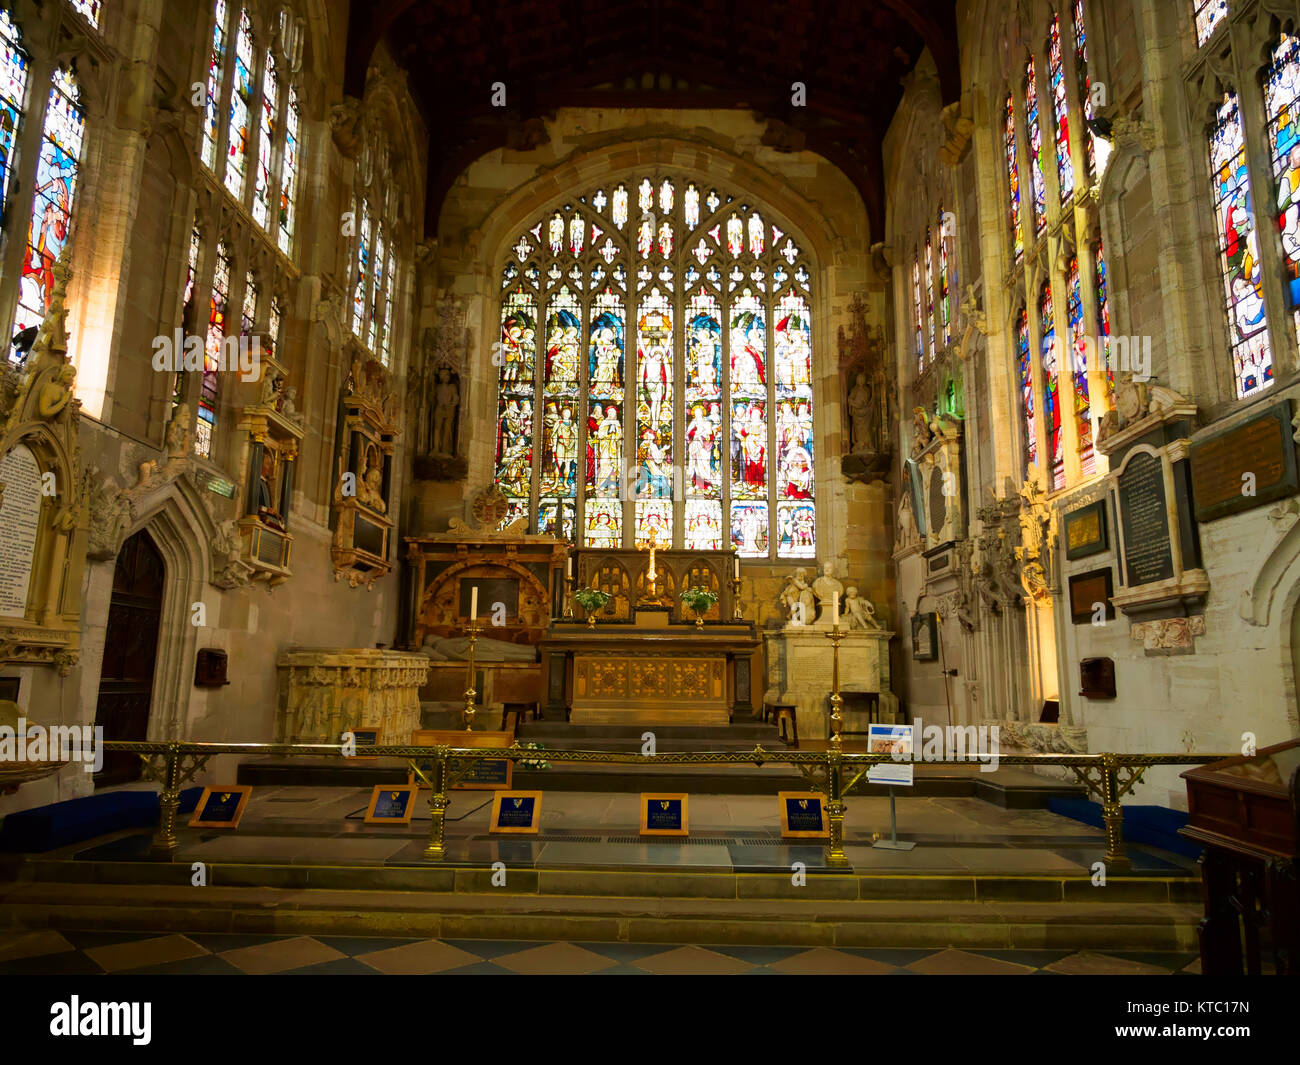 Altar and stained glass windows, Holy Trinity Church, Stratford-upon-Avon Stock Photo